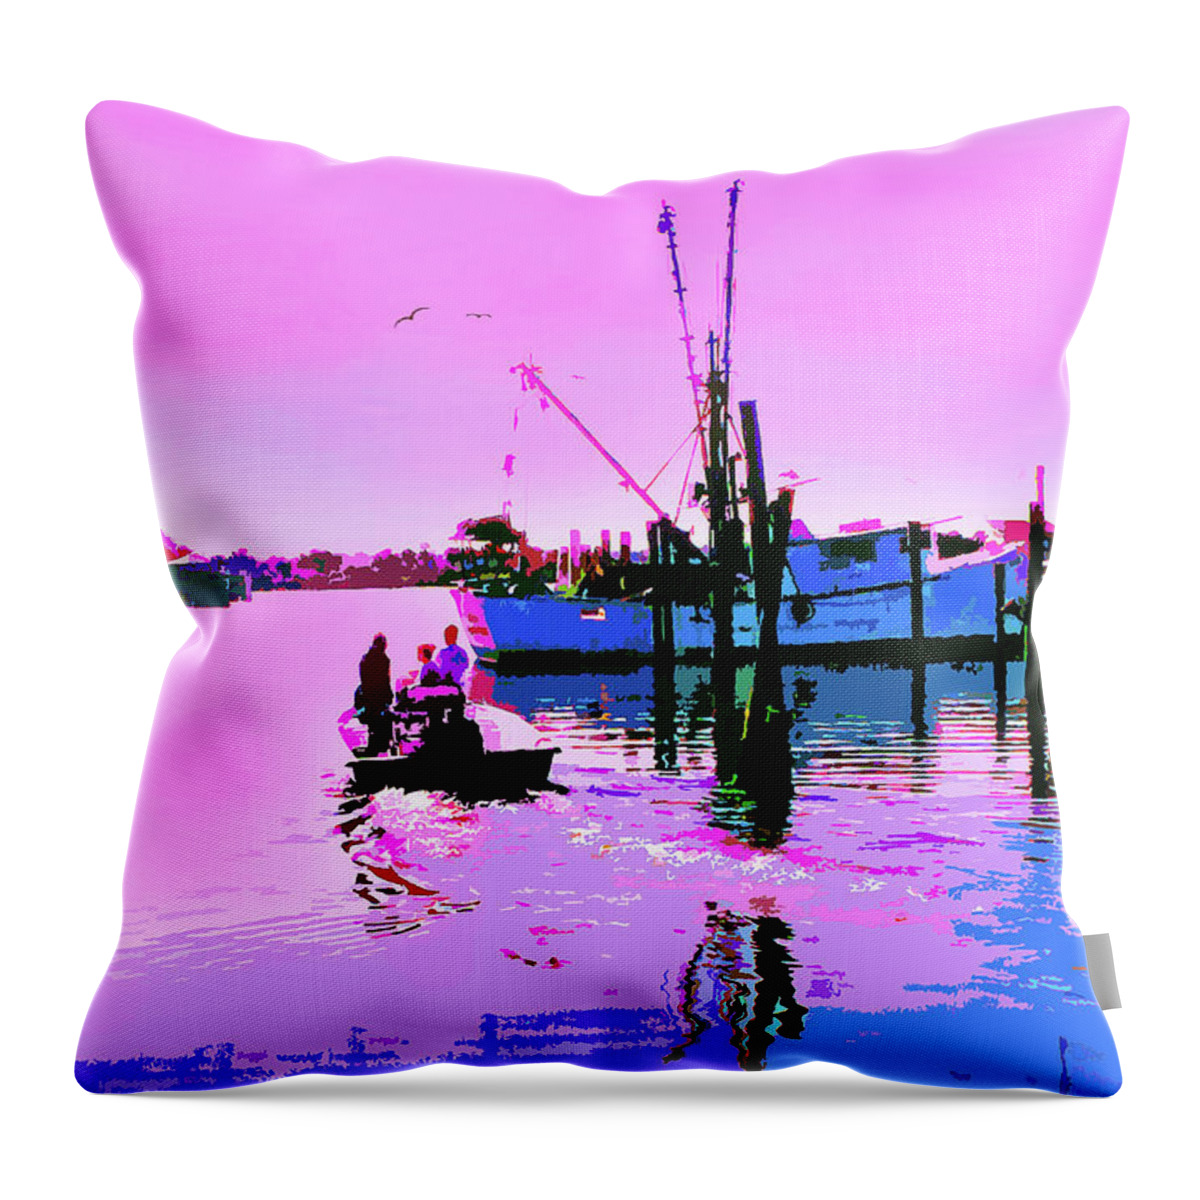 Fishing Throw Pillow featuring the painting Florida Fishing Dock by CHAZ Daugherty